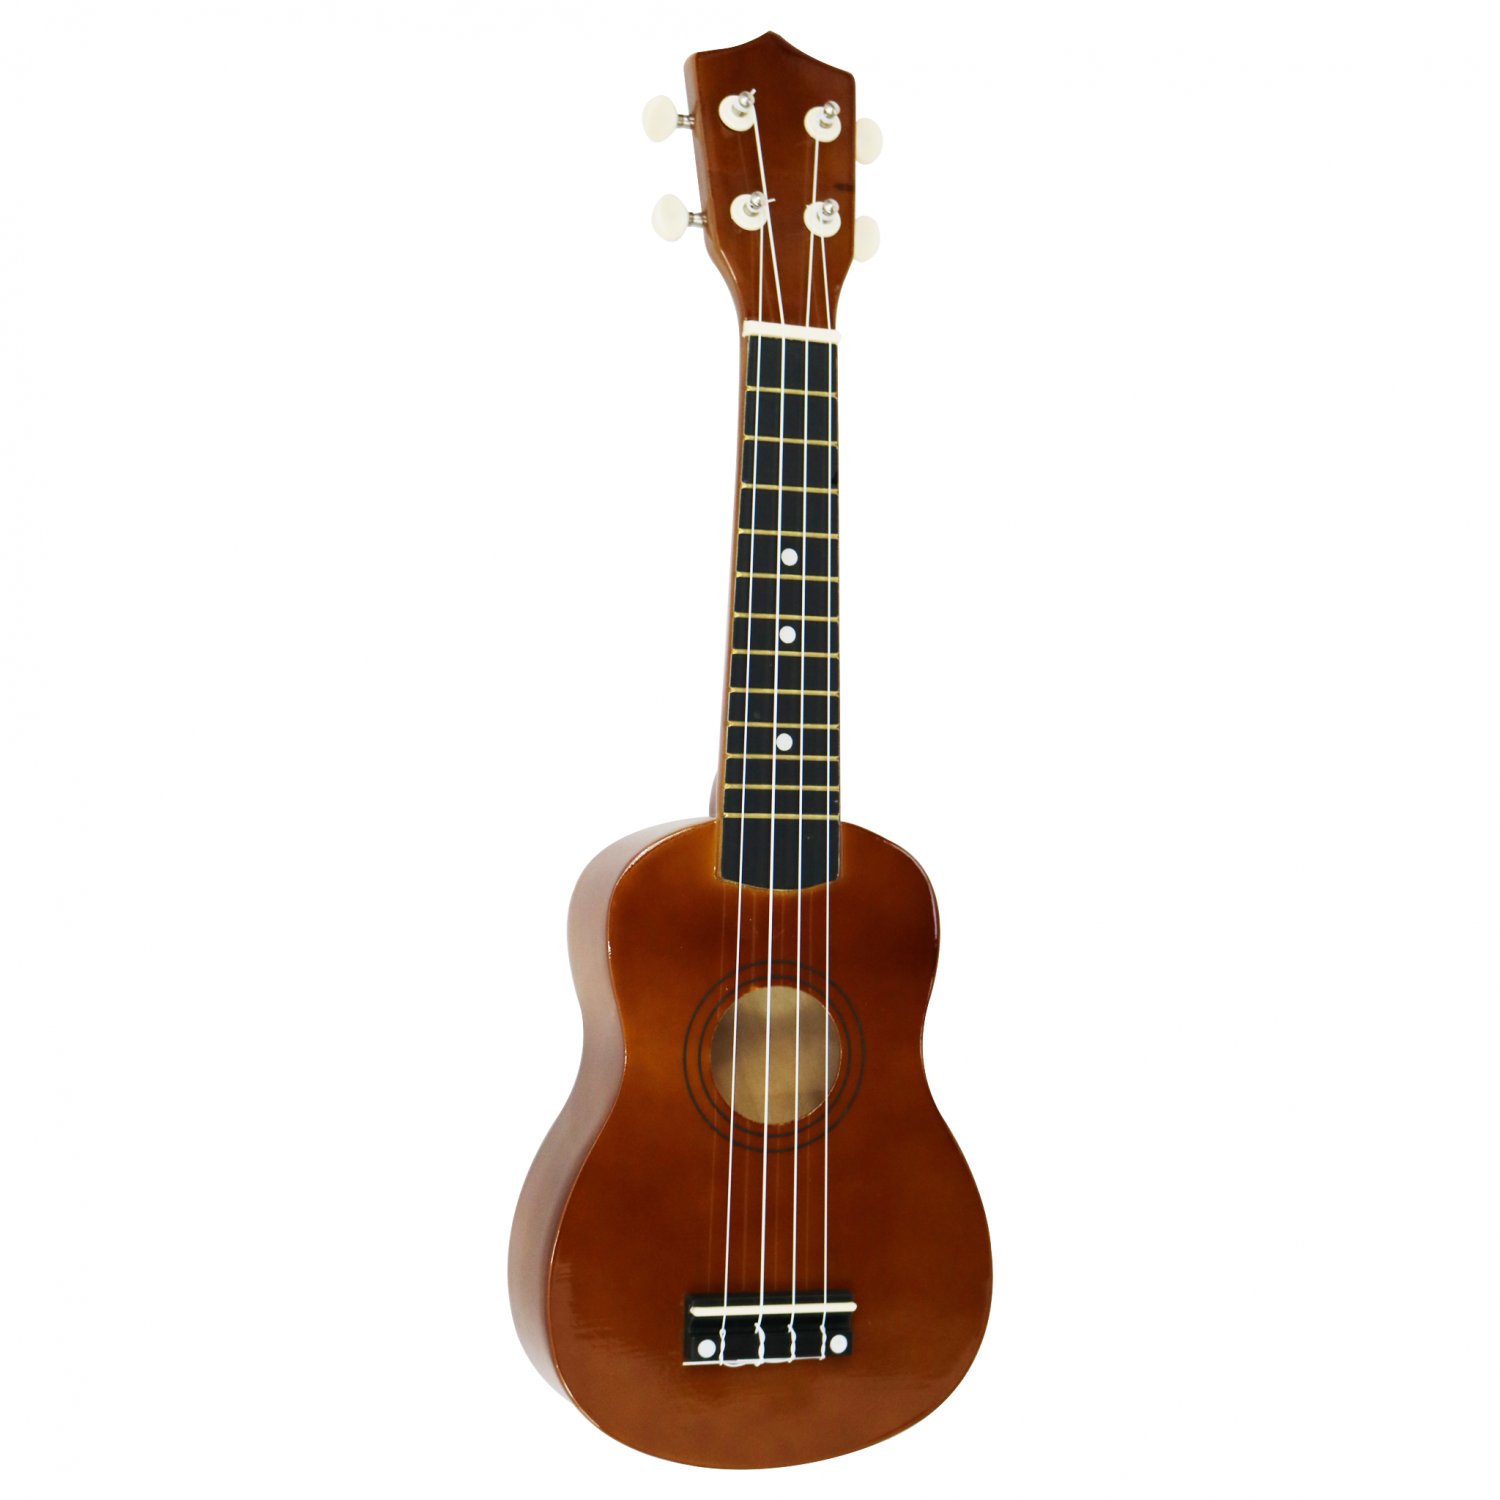 21" Soprano 4 String Ukulele with Carry Bag - £17.99 : Oypla - Stocking the very best in Toys